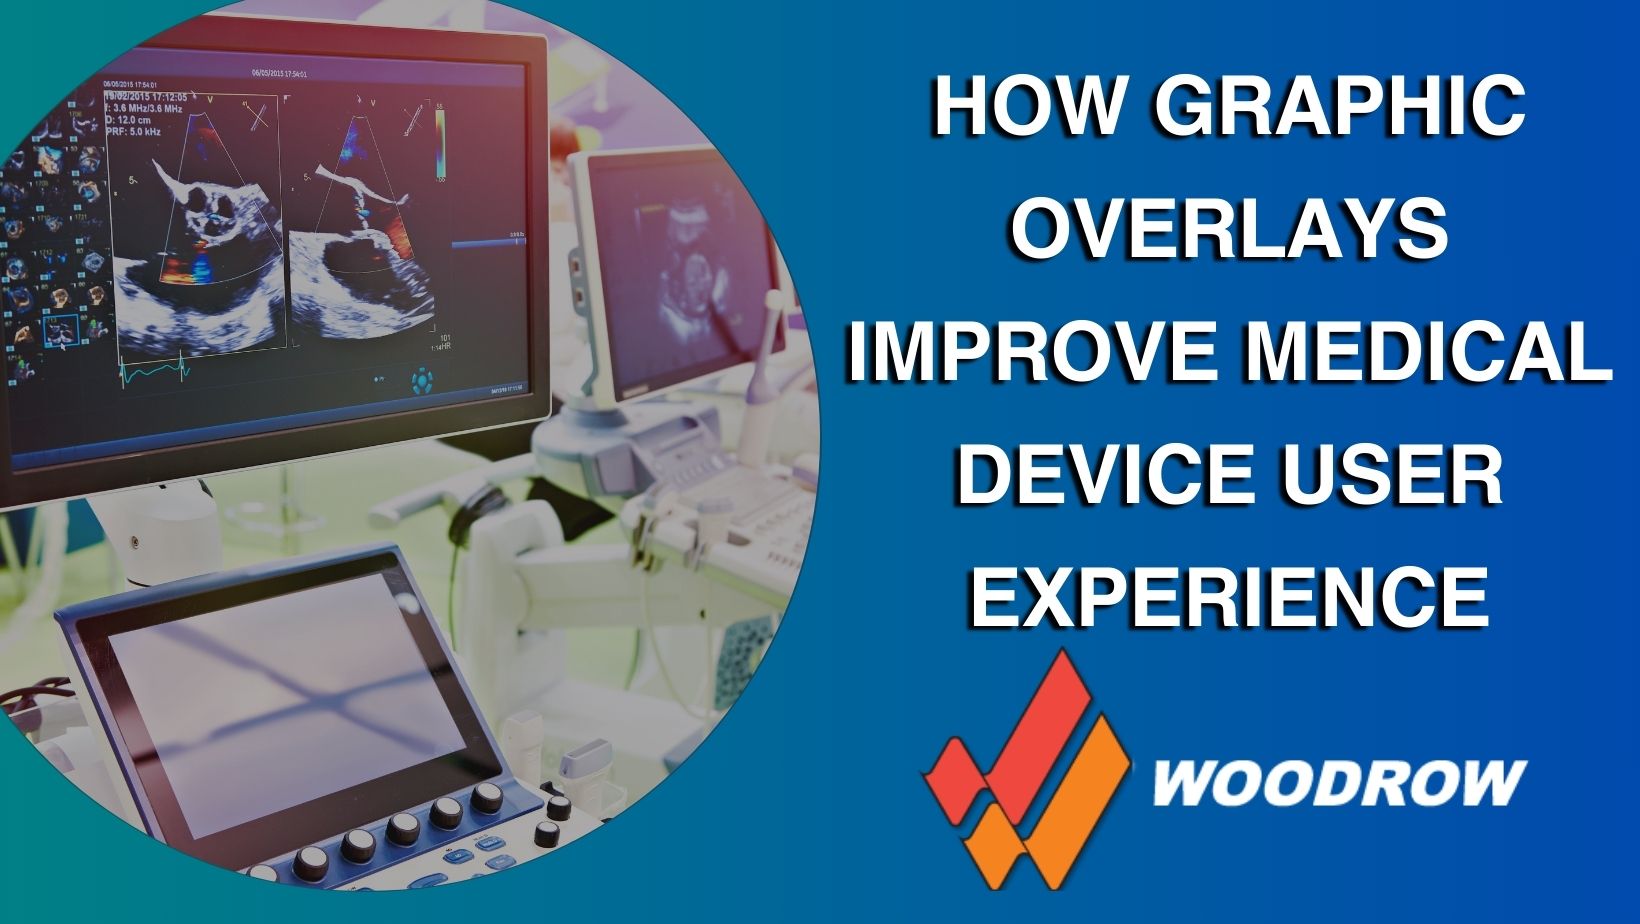 HOW GRAPHIC OVERLAYS IMPROVE MEDICAL DEVICE USER EXPERIENCE